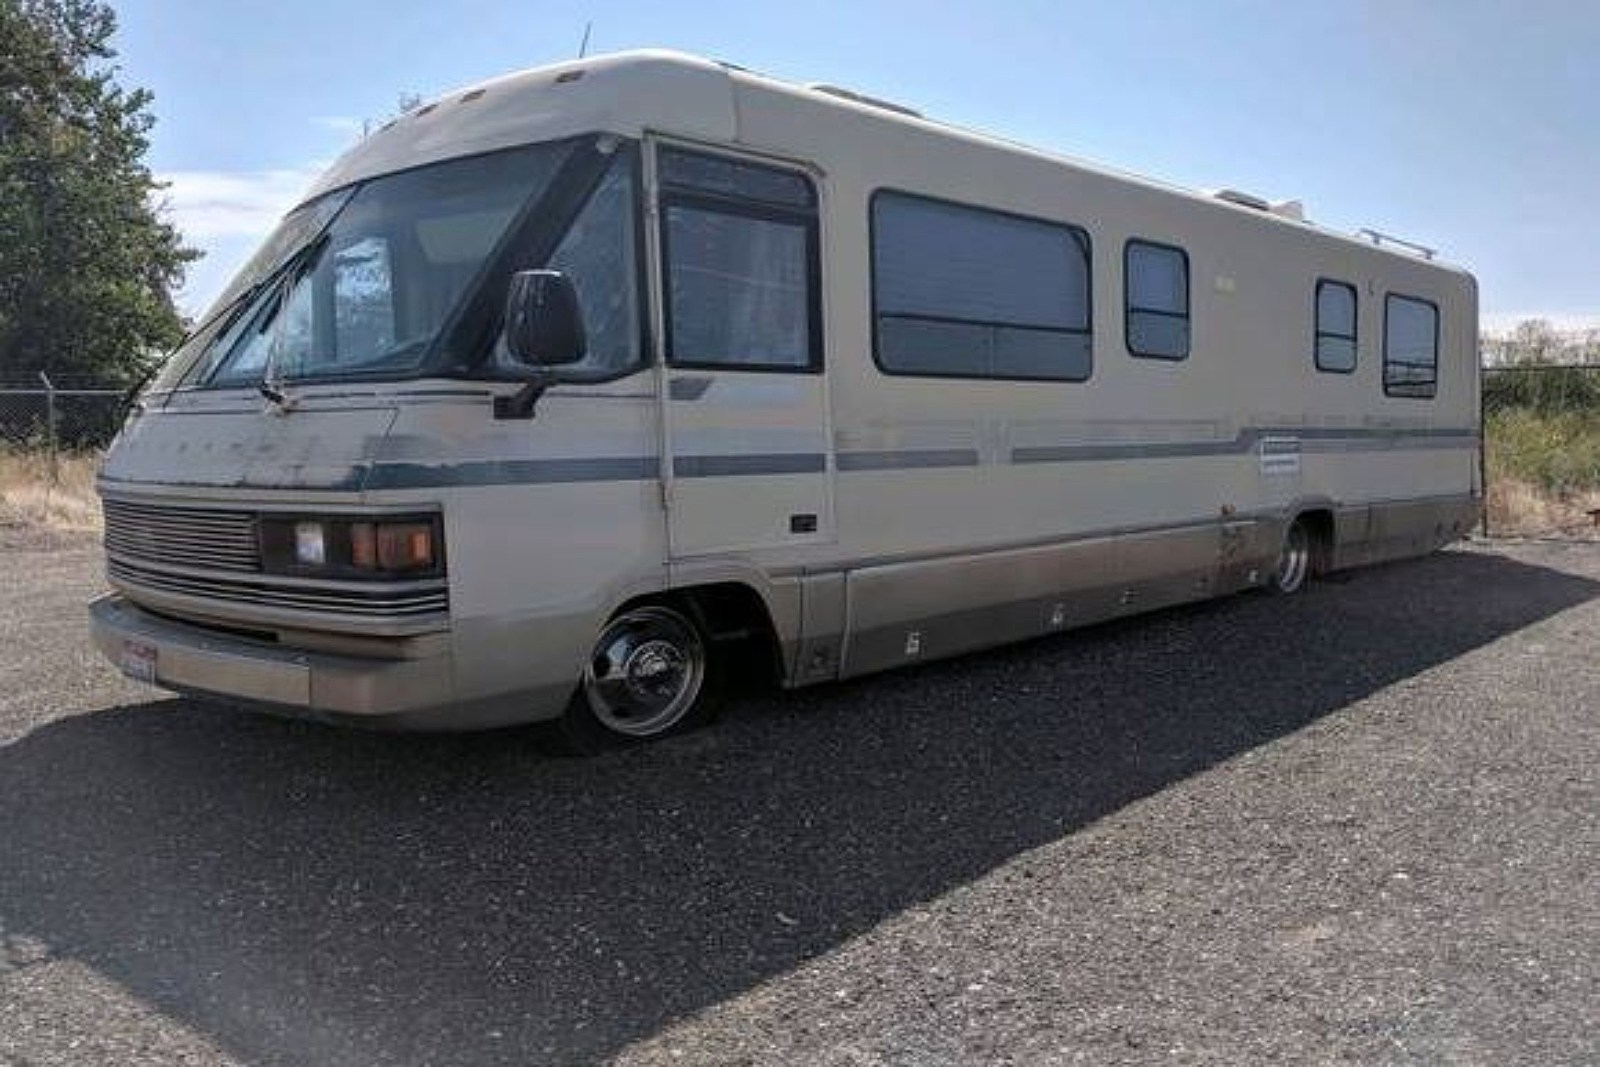 Hey, There's A Free RV On Twin Falls Craigslist